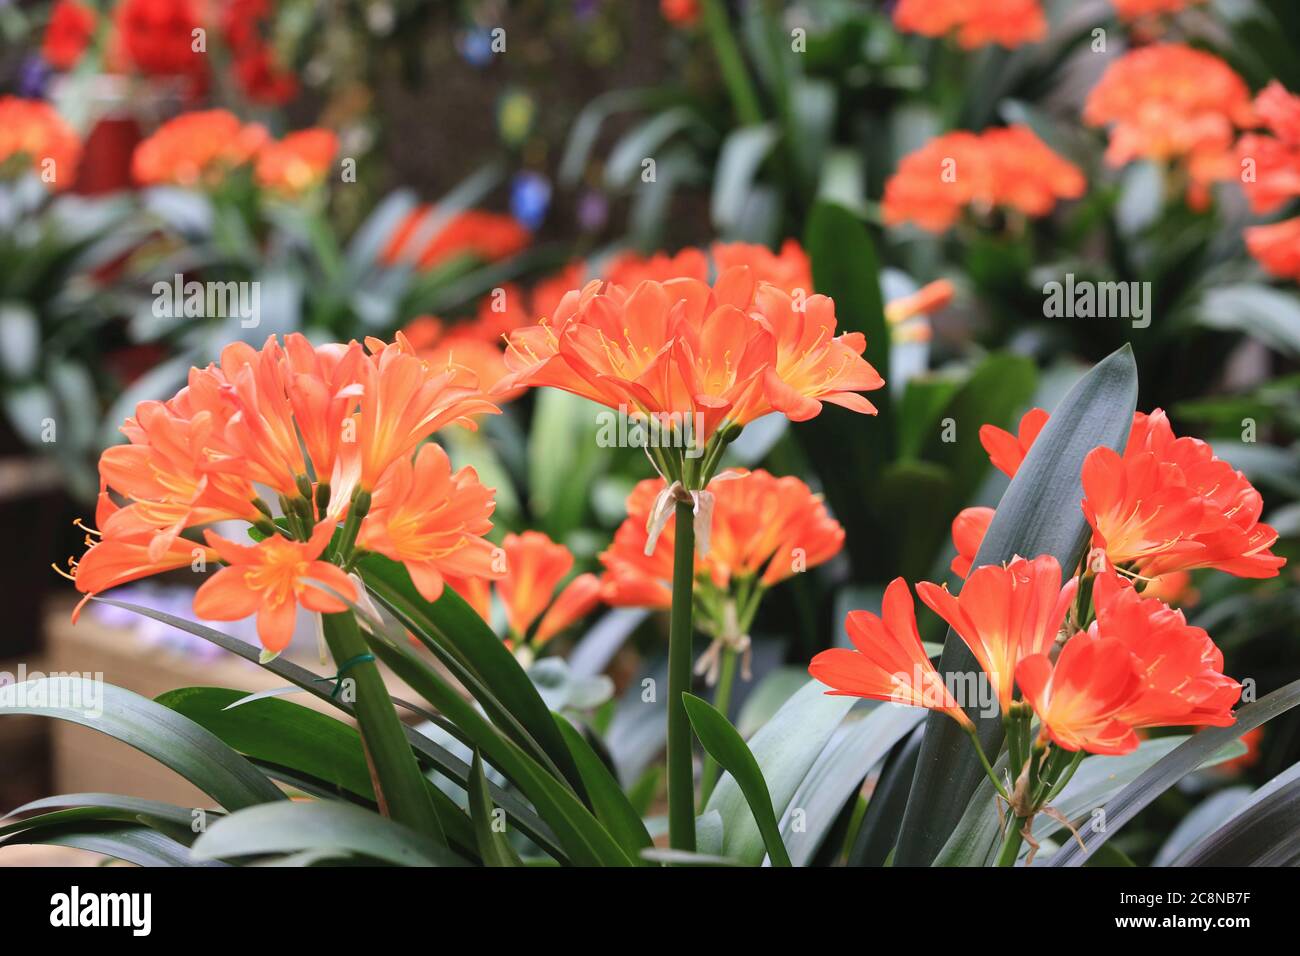 Bush lily(Clivia miniata,Natal lily,Kaffir lily,Fire lily),beautiful yellow with orange flowers blooming in the garden in spring Stock Photo